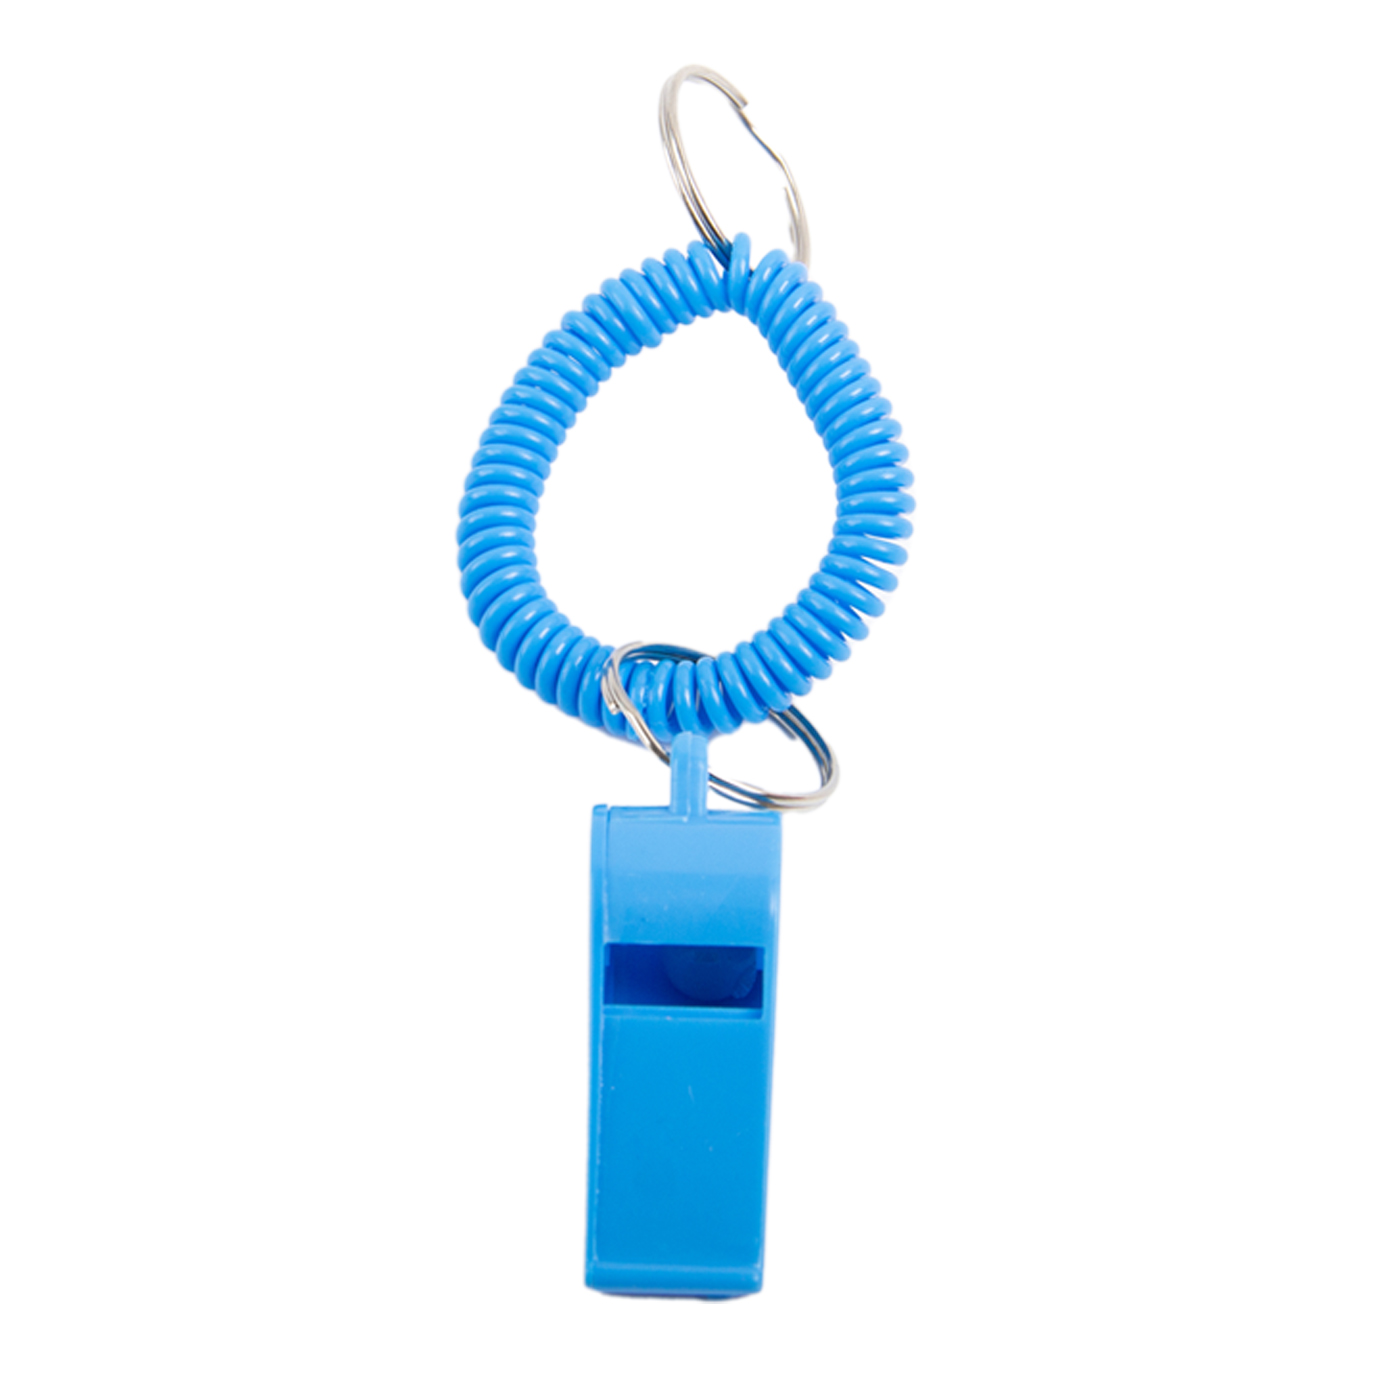 Personalized Colored Plastic Whistle Bracelet Keychain1